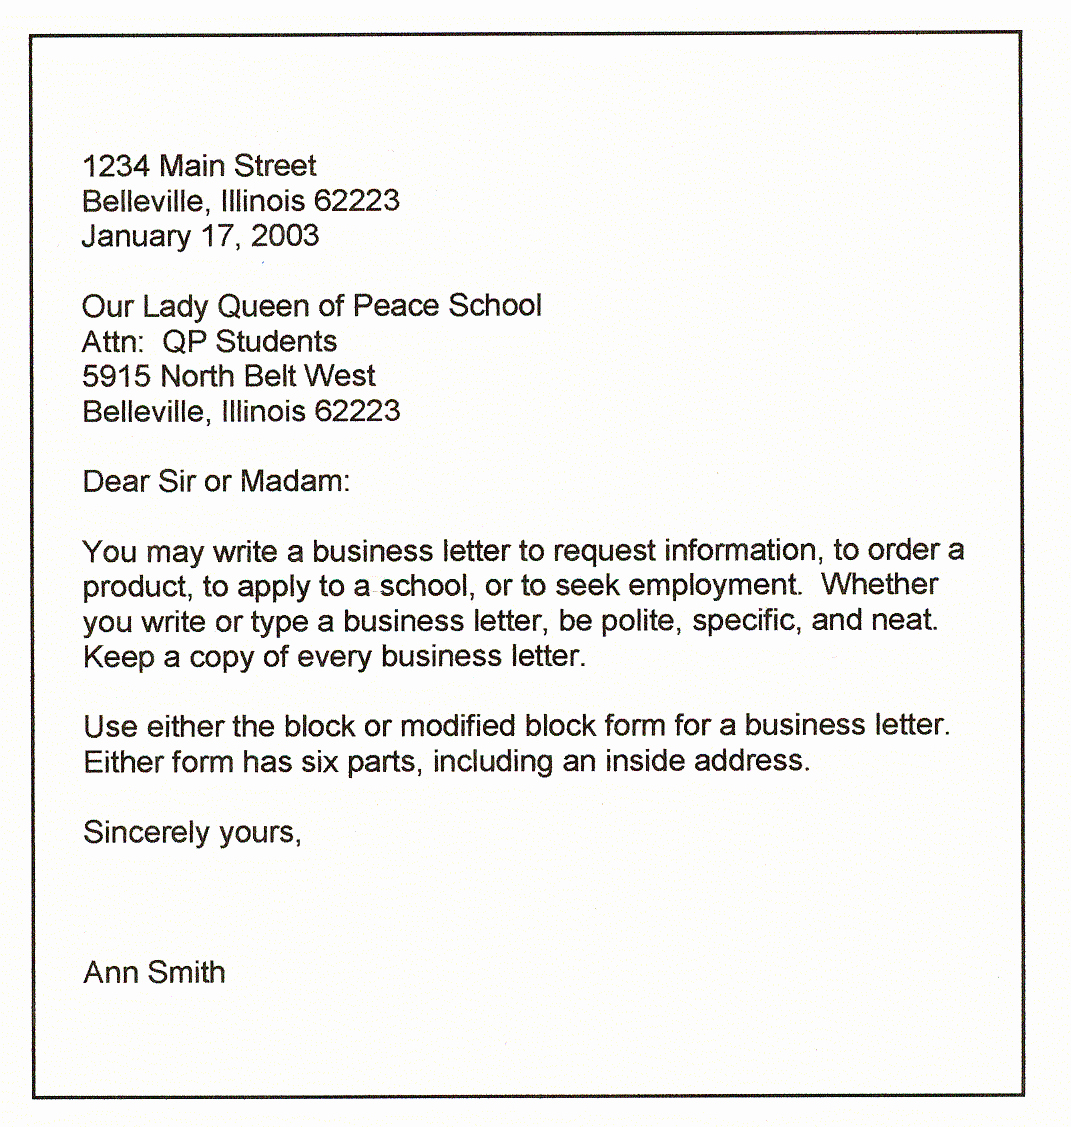 Business form Letter Template Best Of Business Letter formats Download Business Letters &amp; Pdf